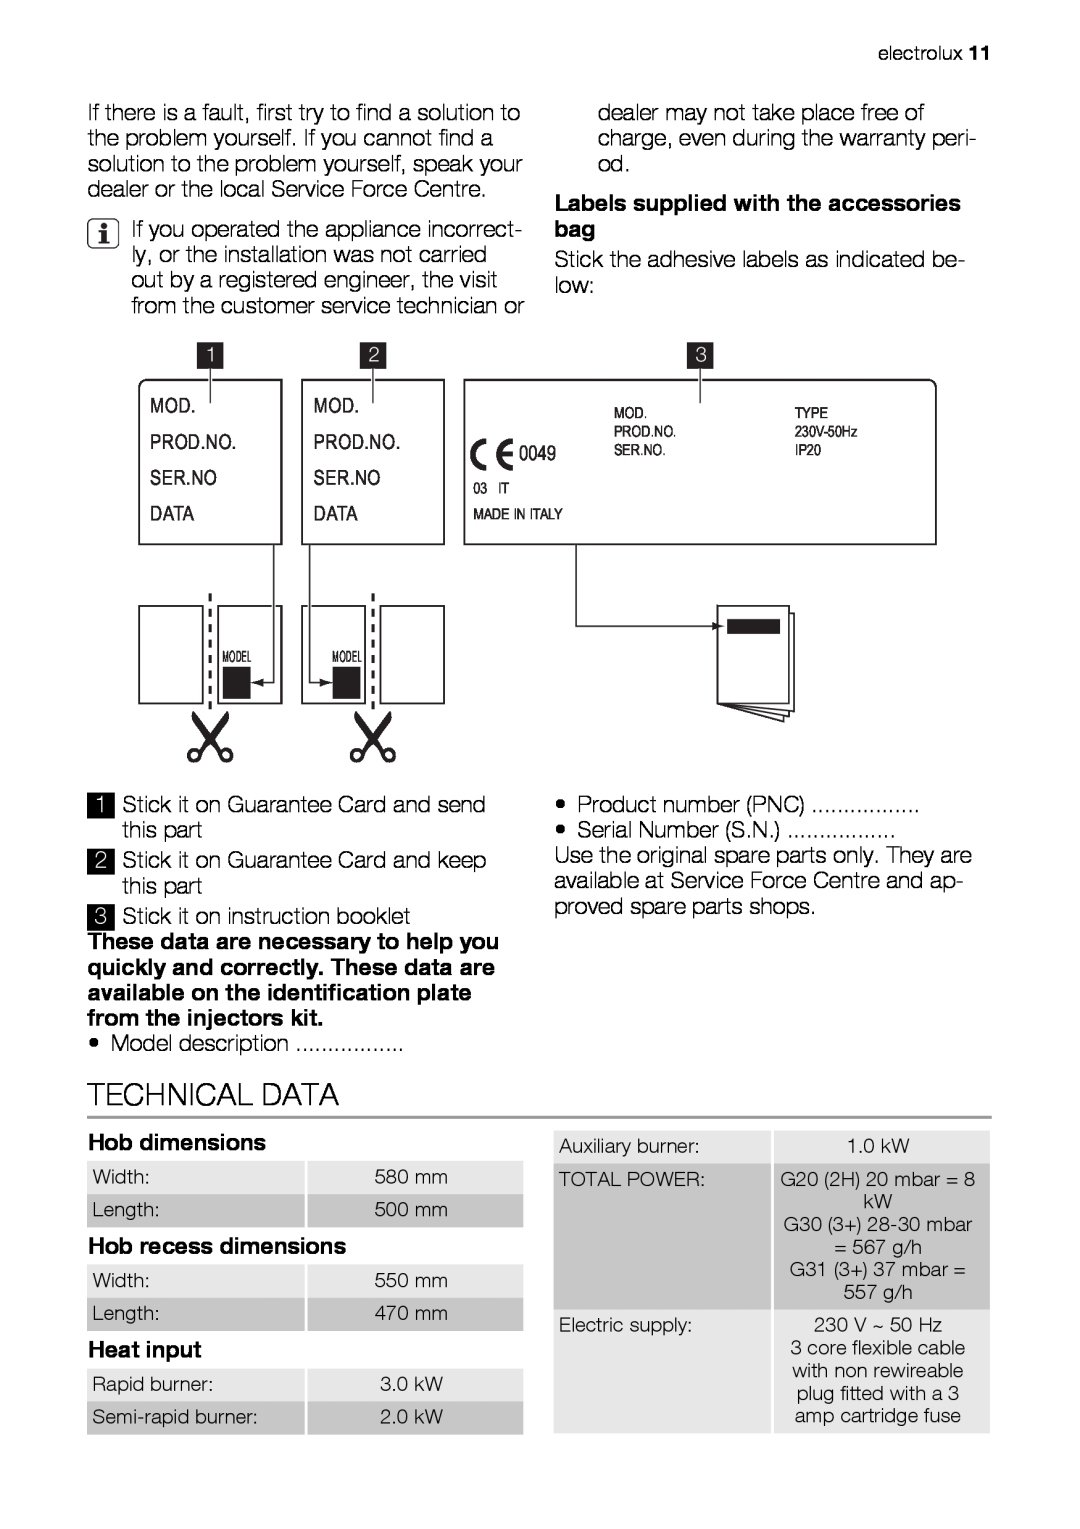 Electrolux EHG60412 Technical Data, Labels supplied with the accessories bag, Hob dimensions, Hob recess dimensions 